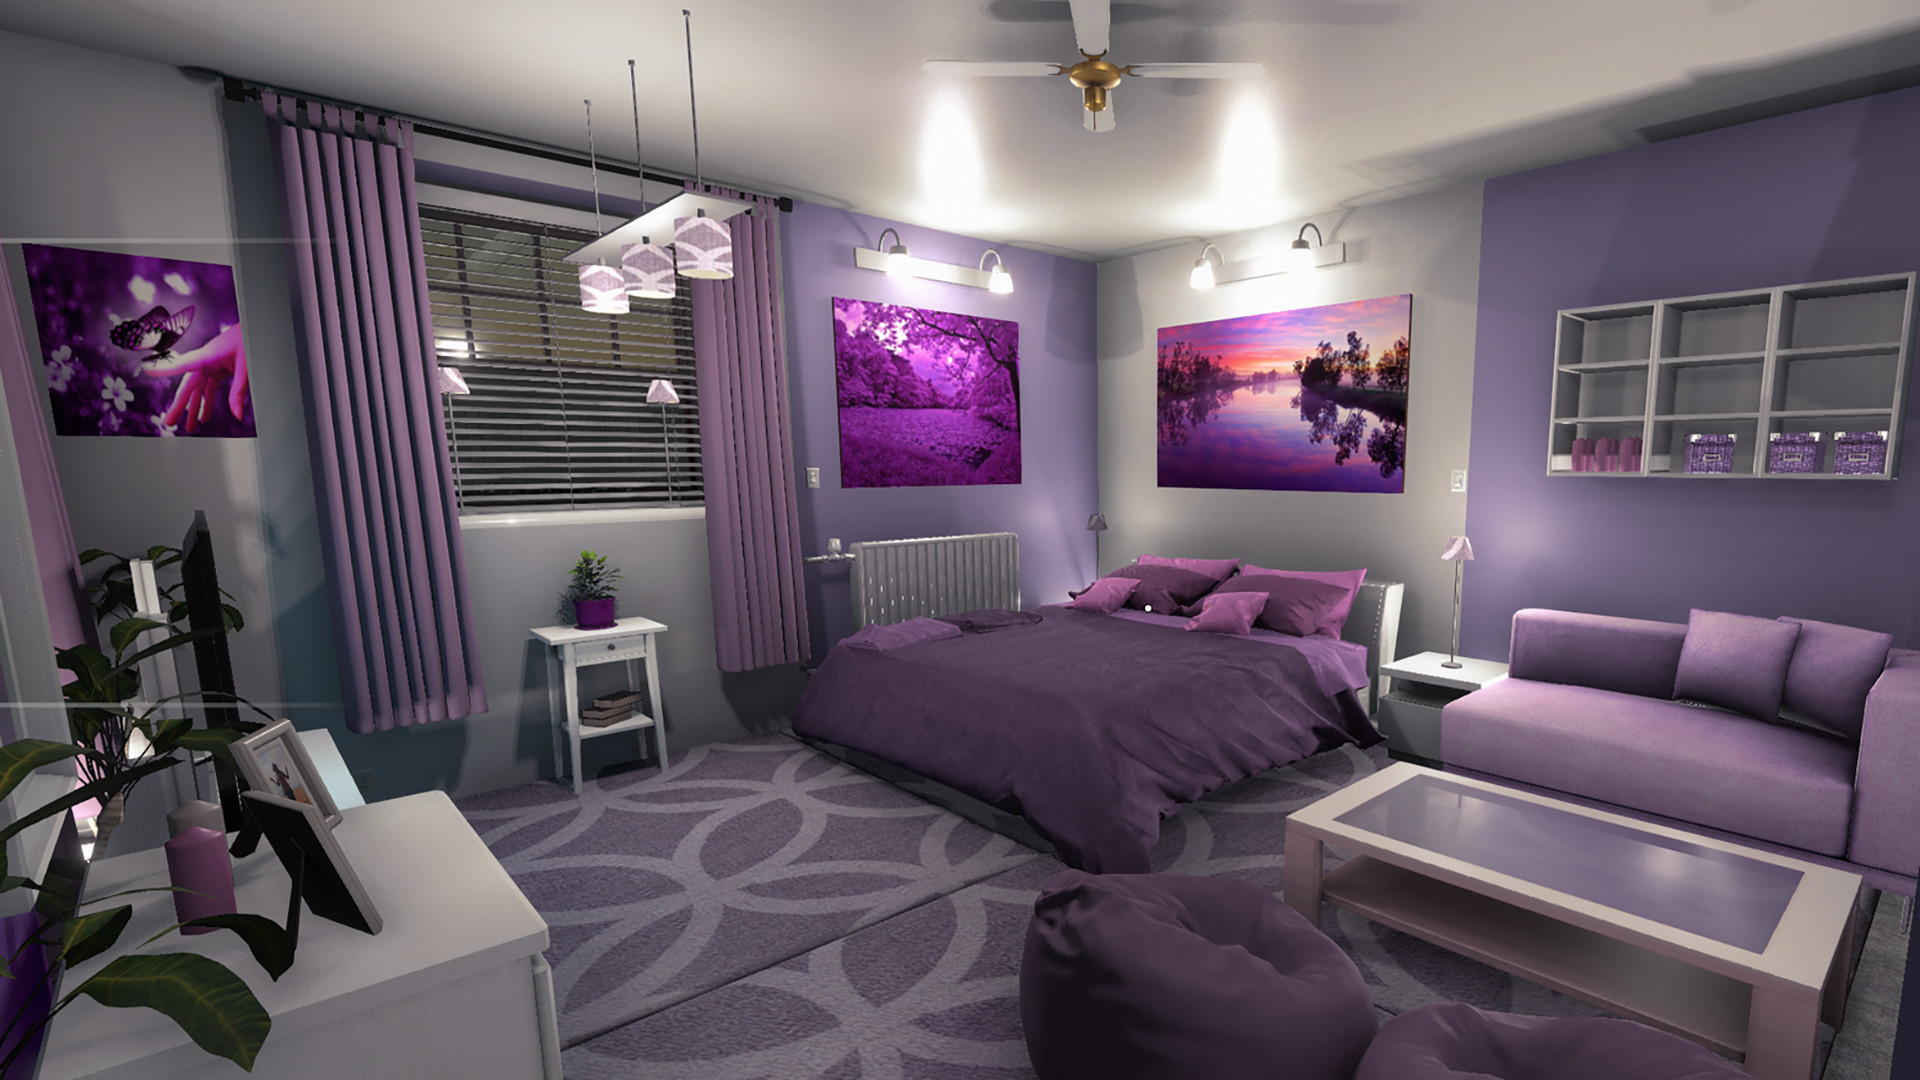 A gorgeous room with lots of purple.